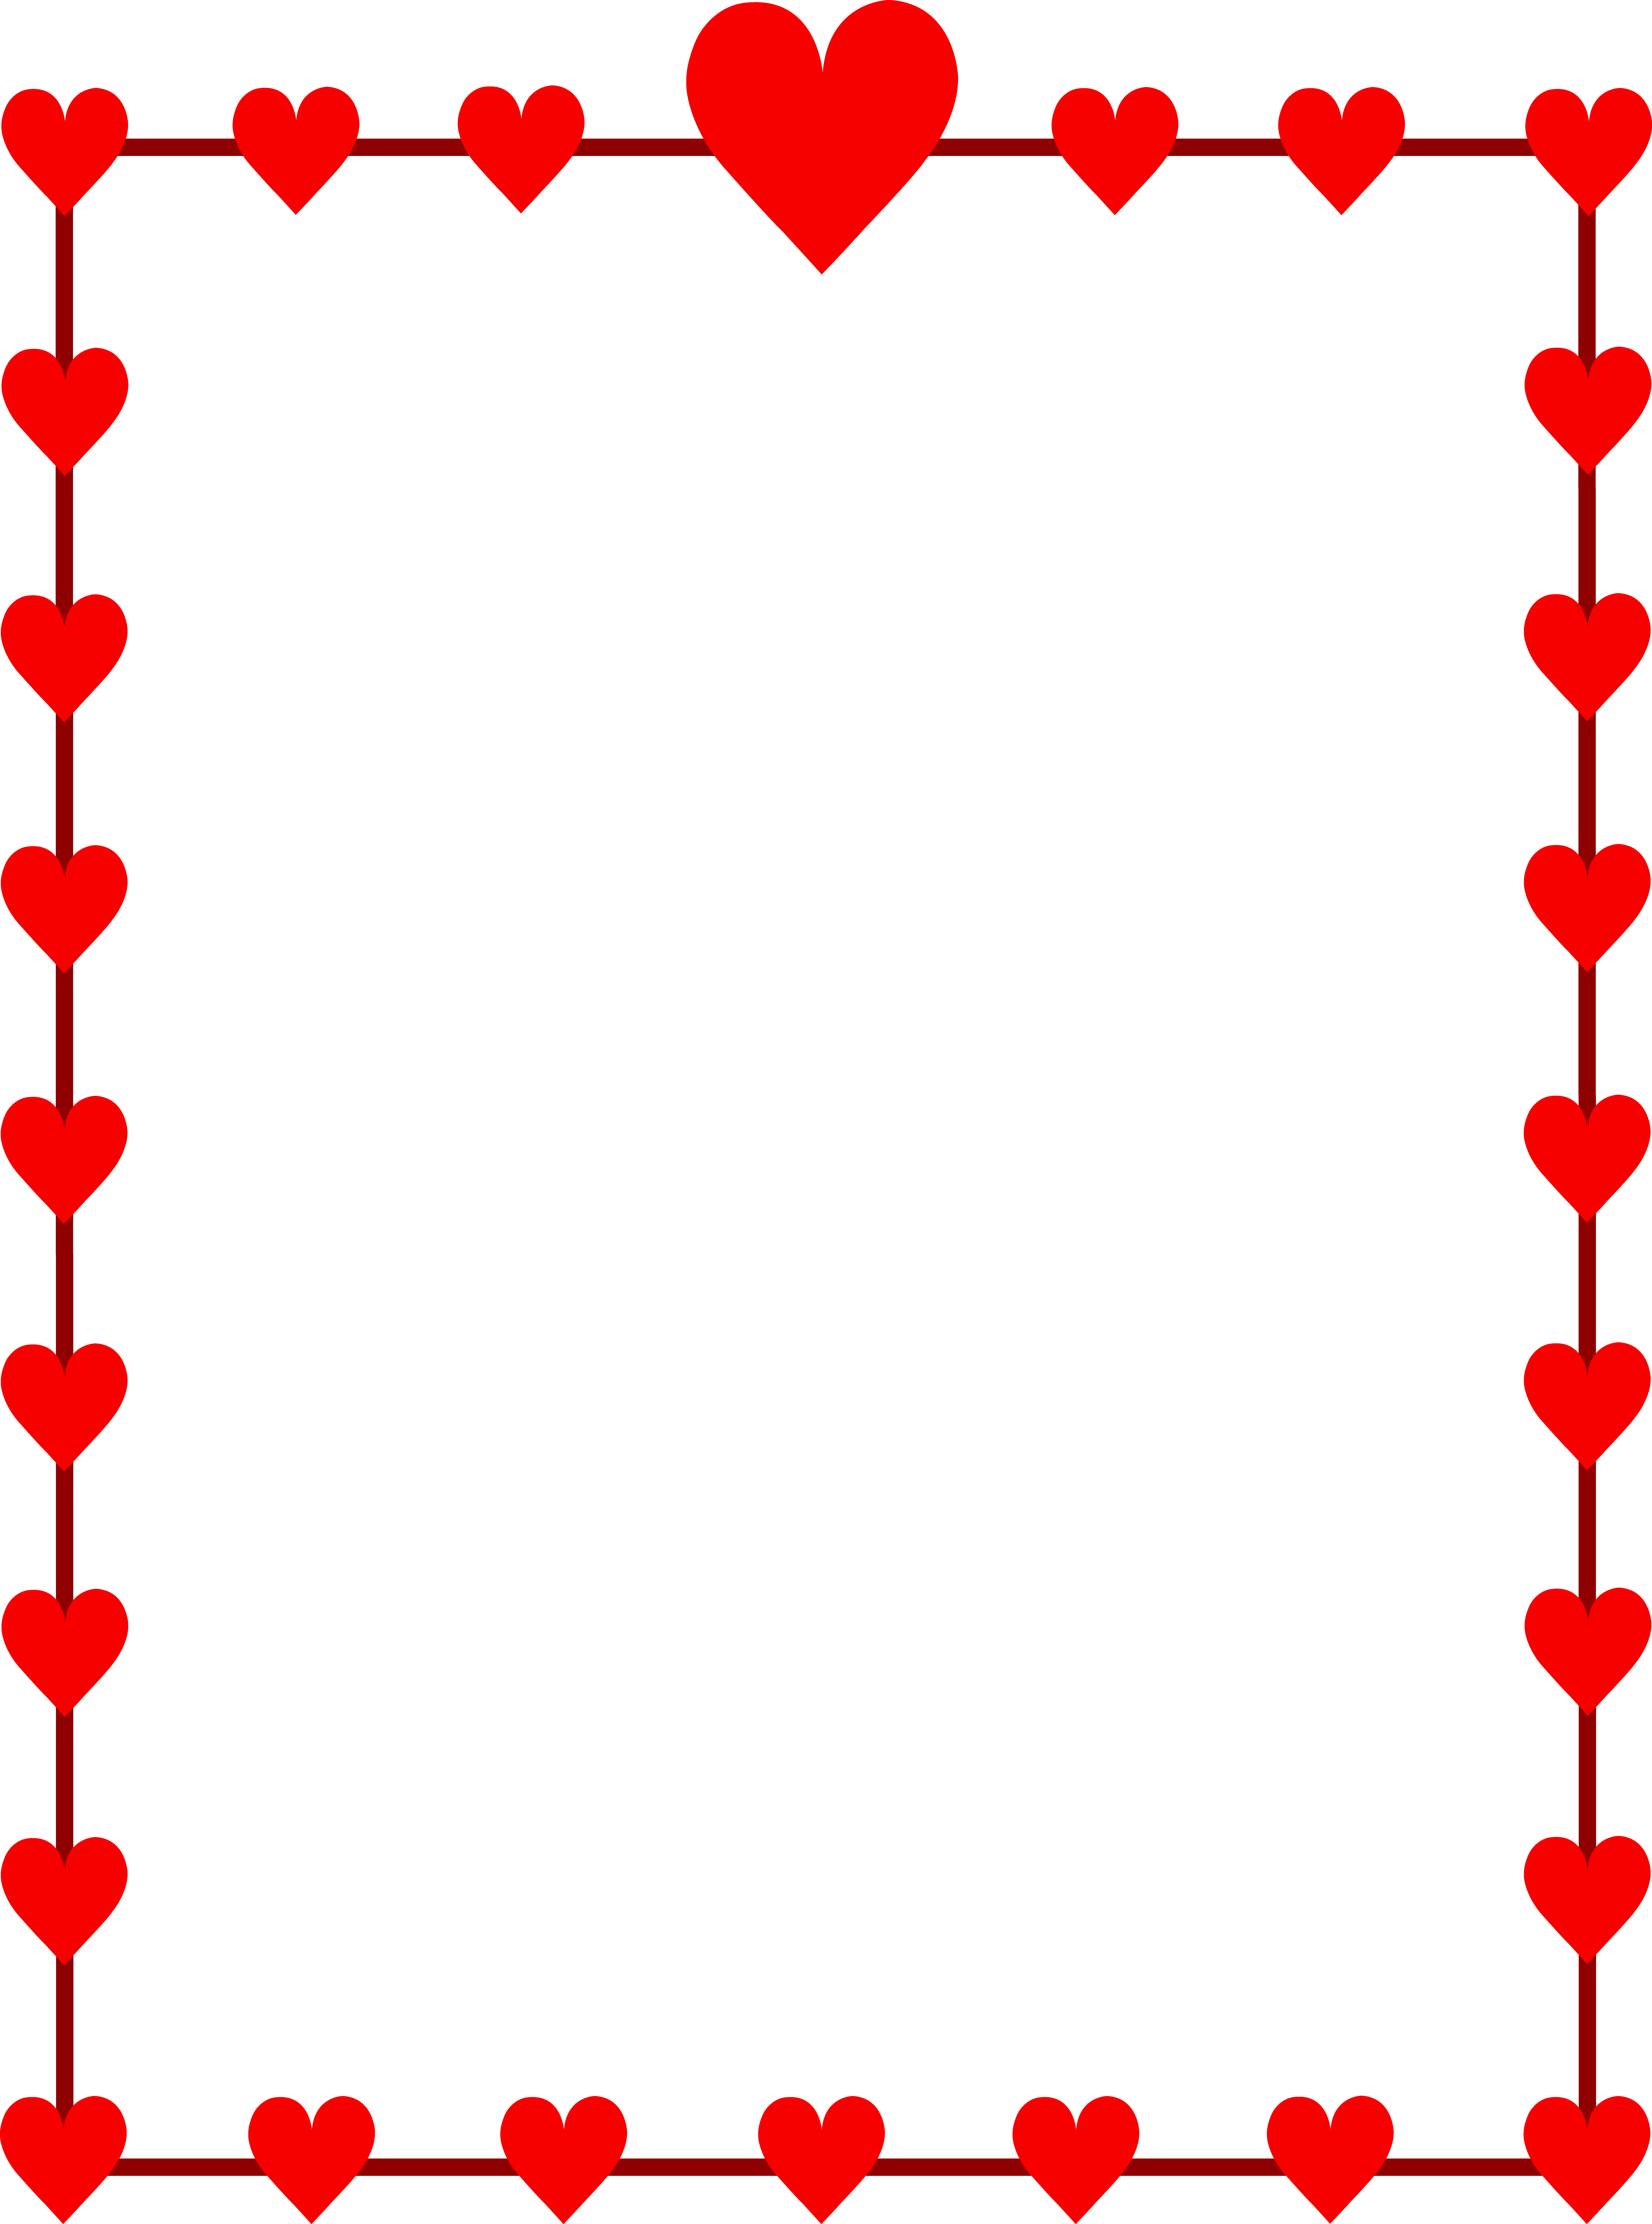 Heart border valentines day clipart